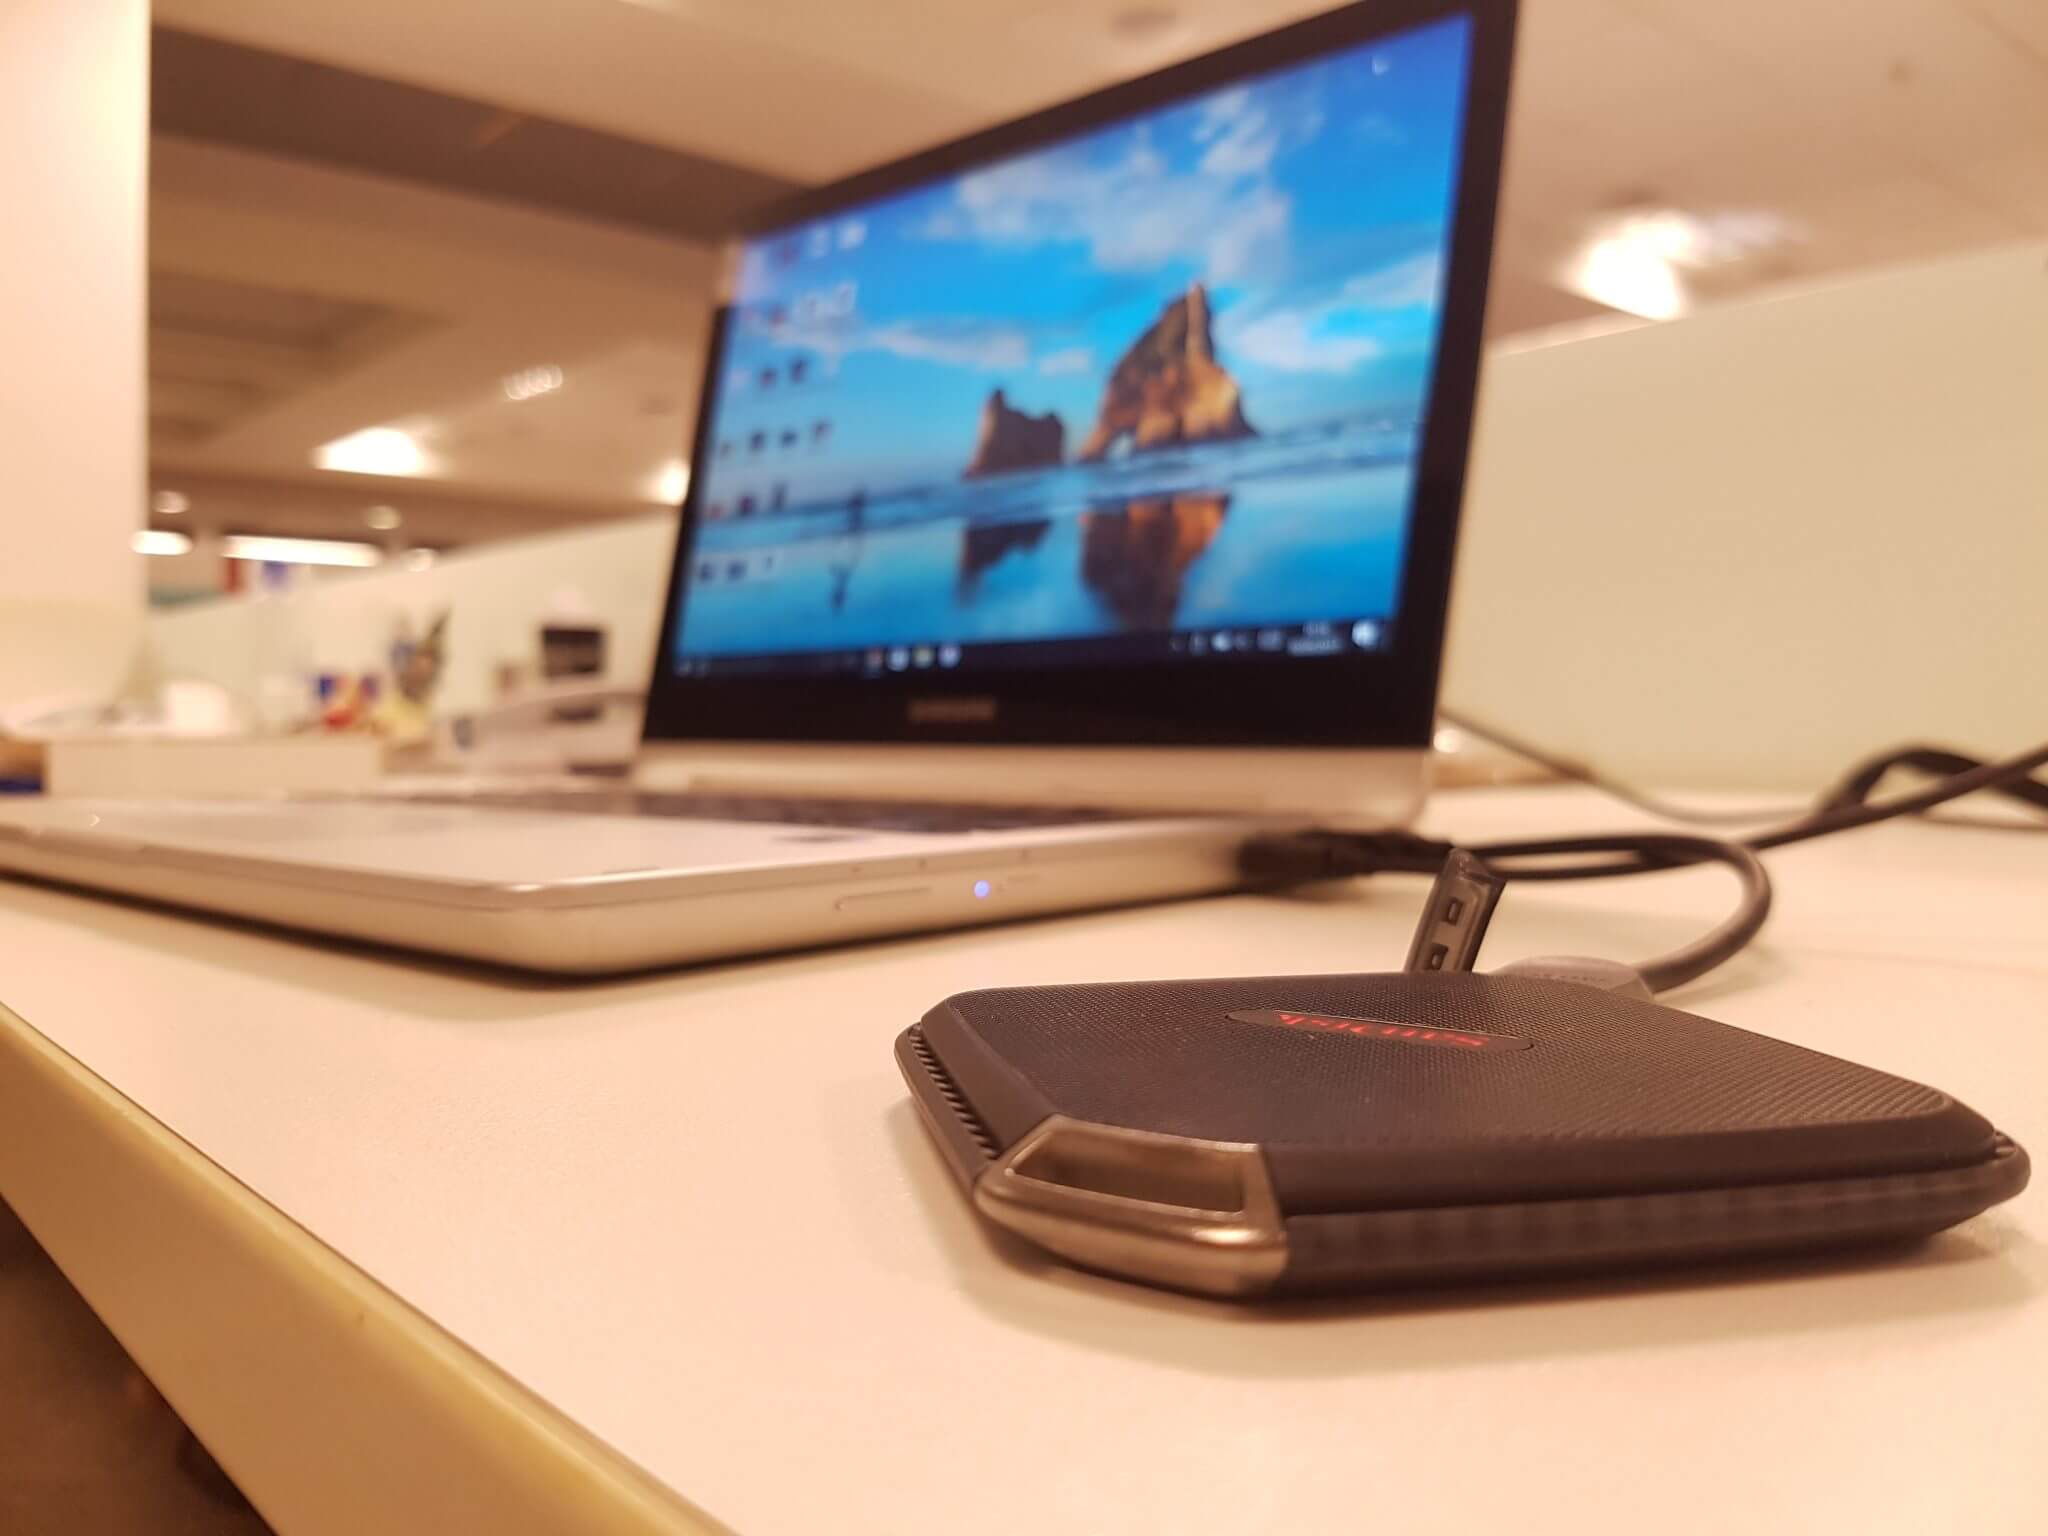 Review: sandisk extreme 500 portable ssd